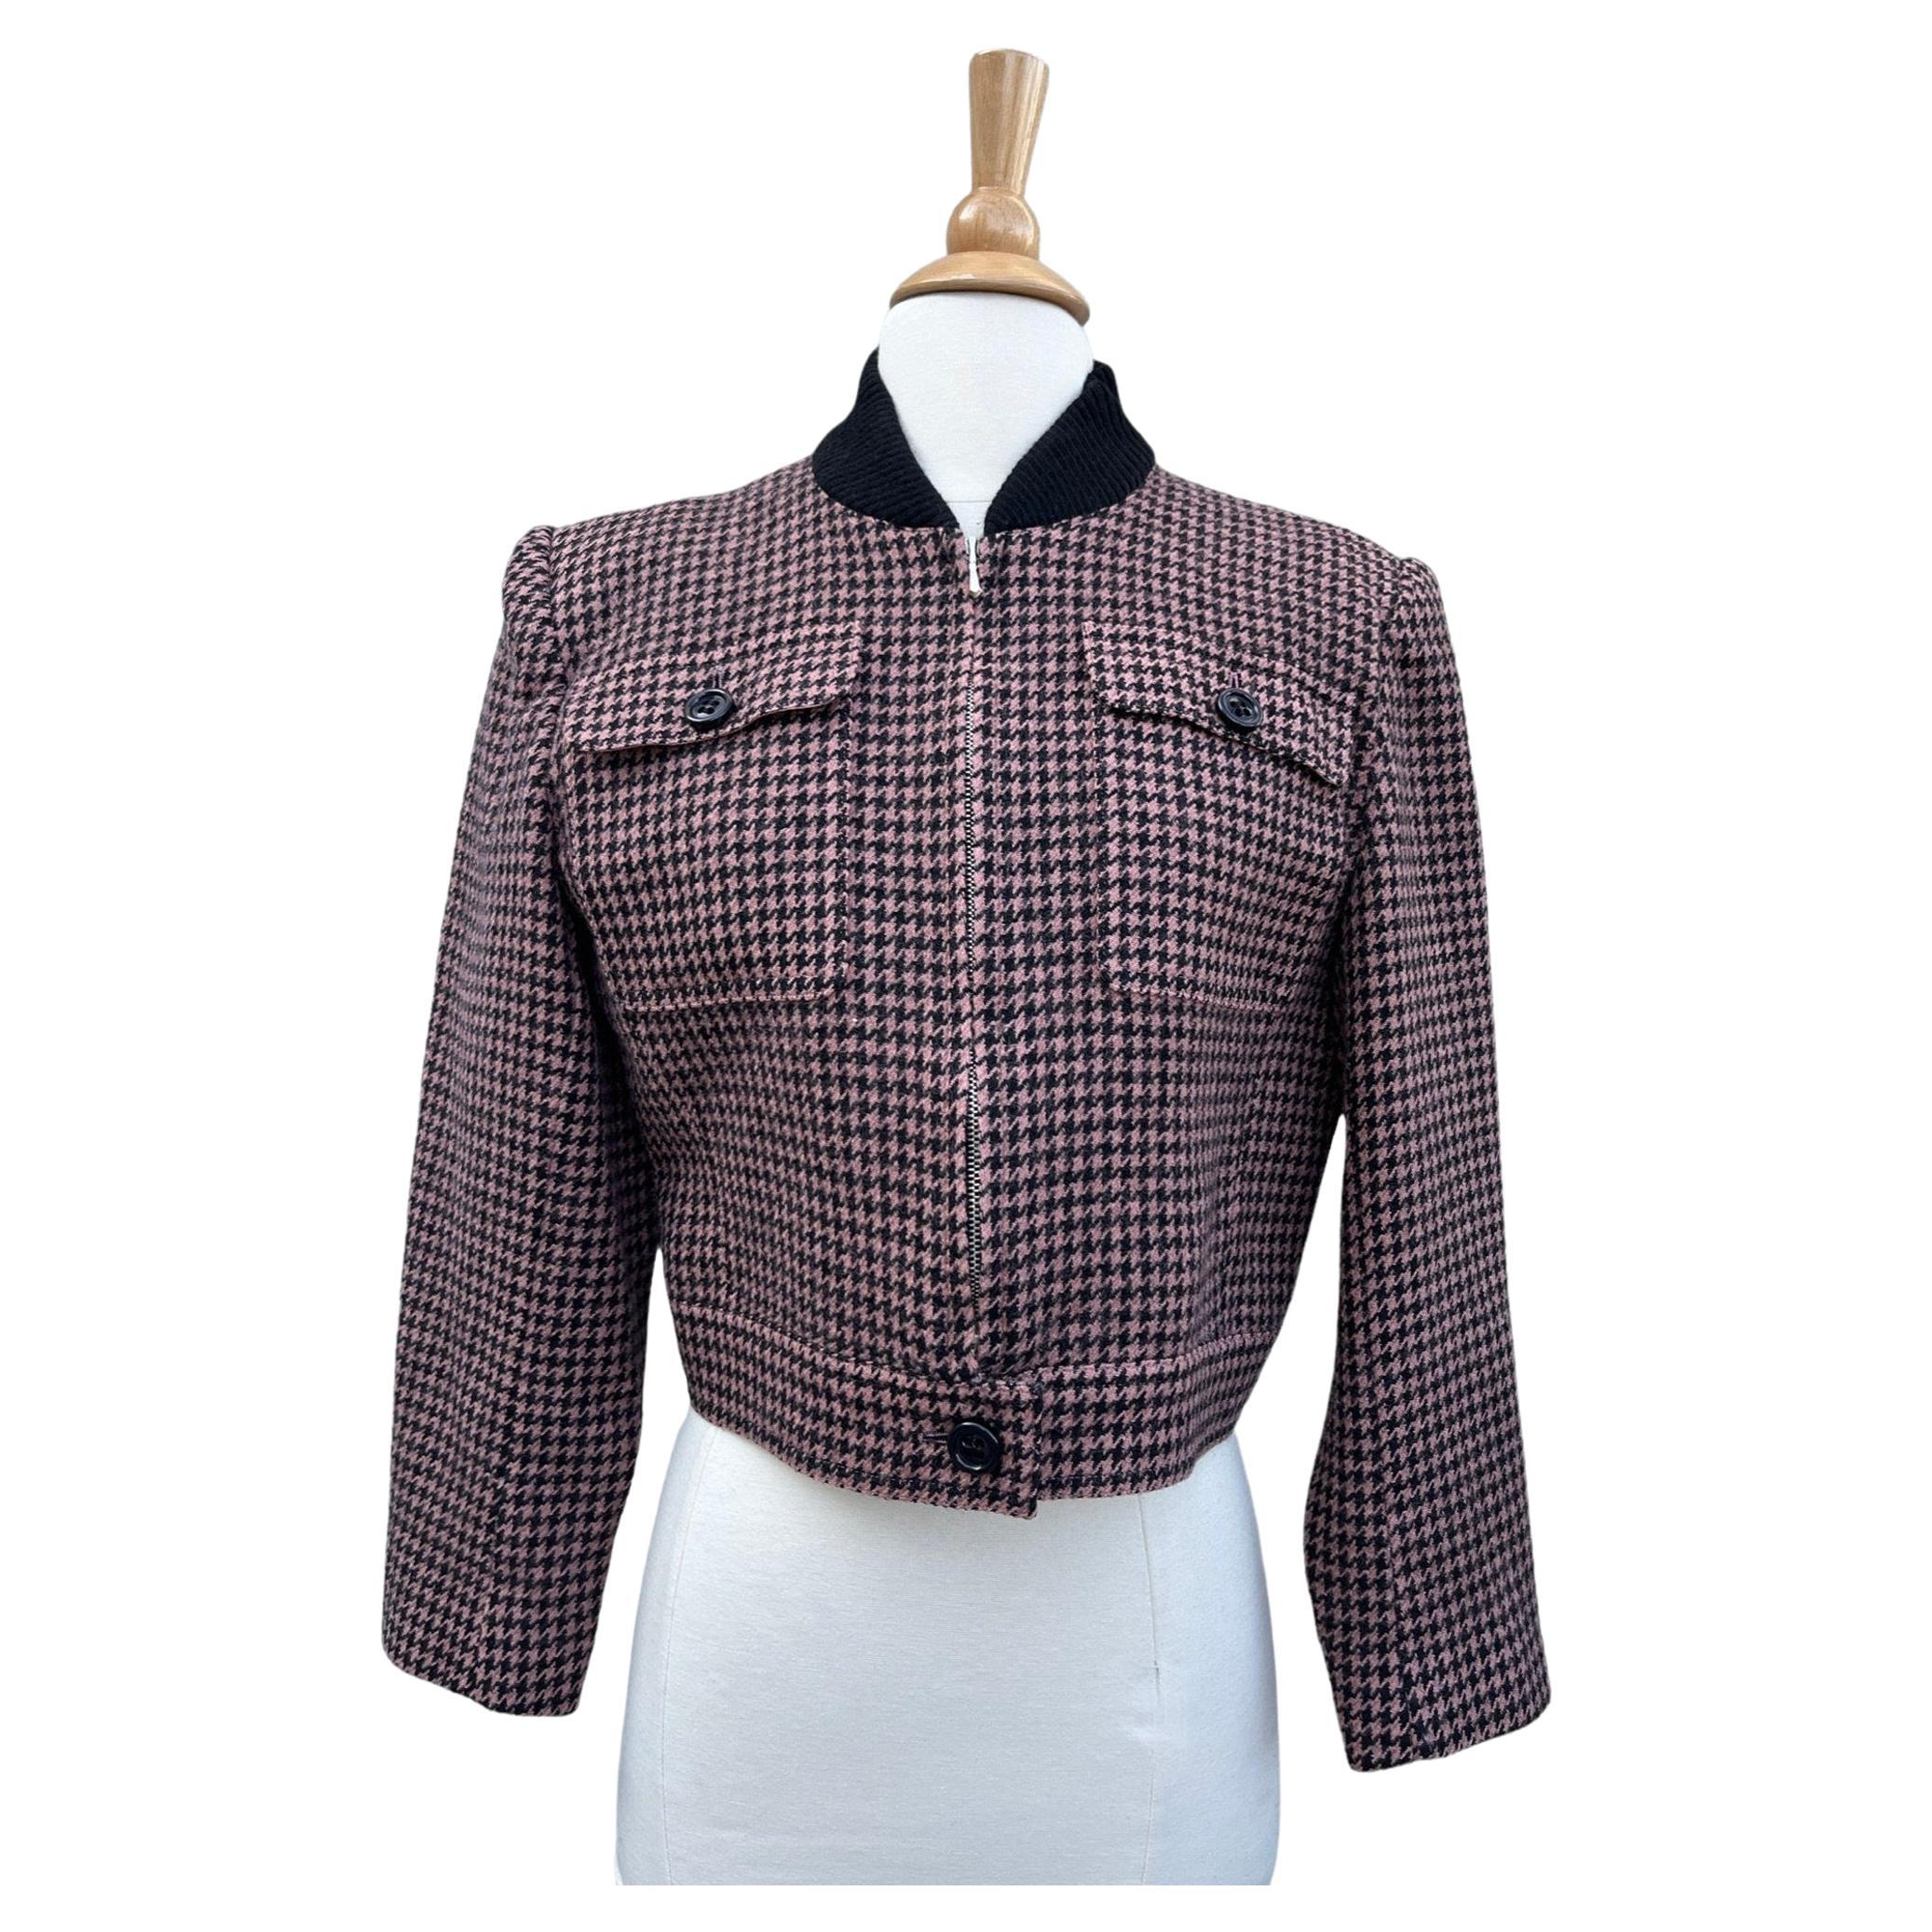 Guy Laroche houndstooth jacket For Sale